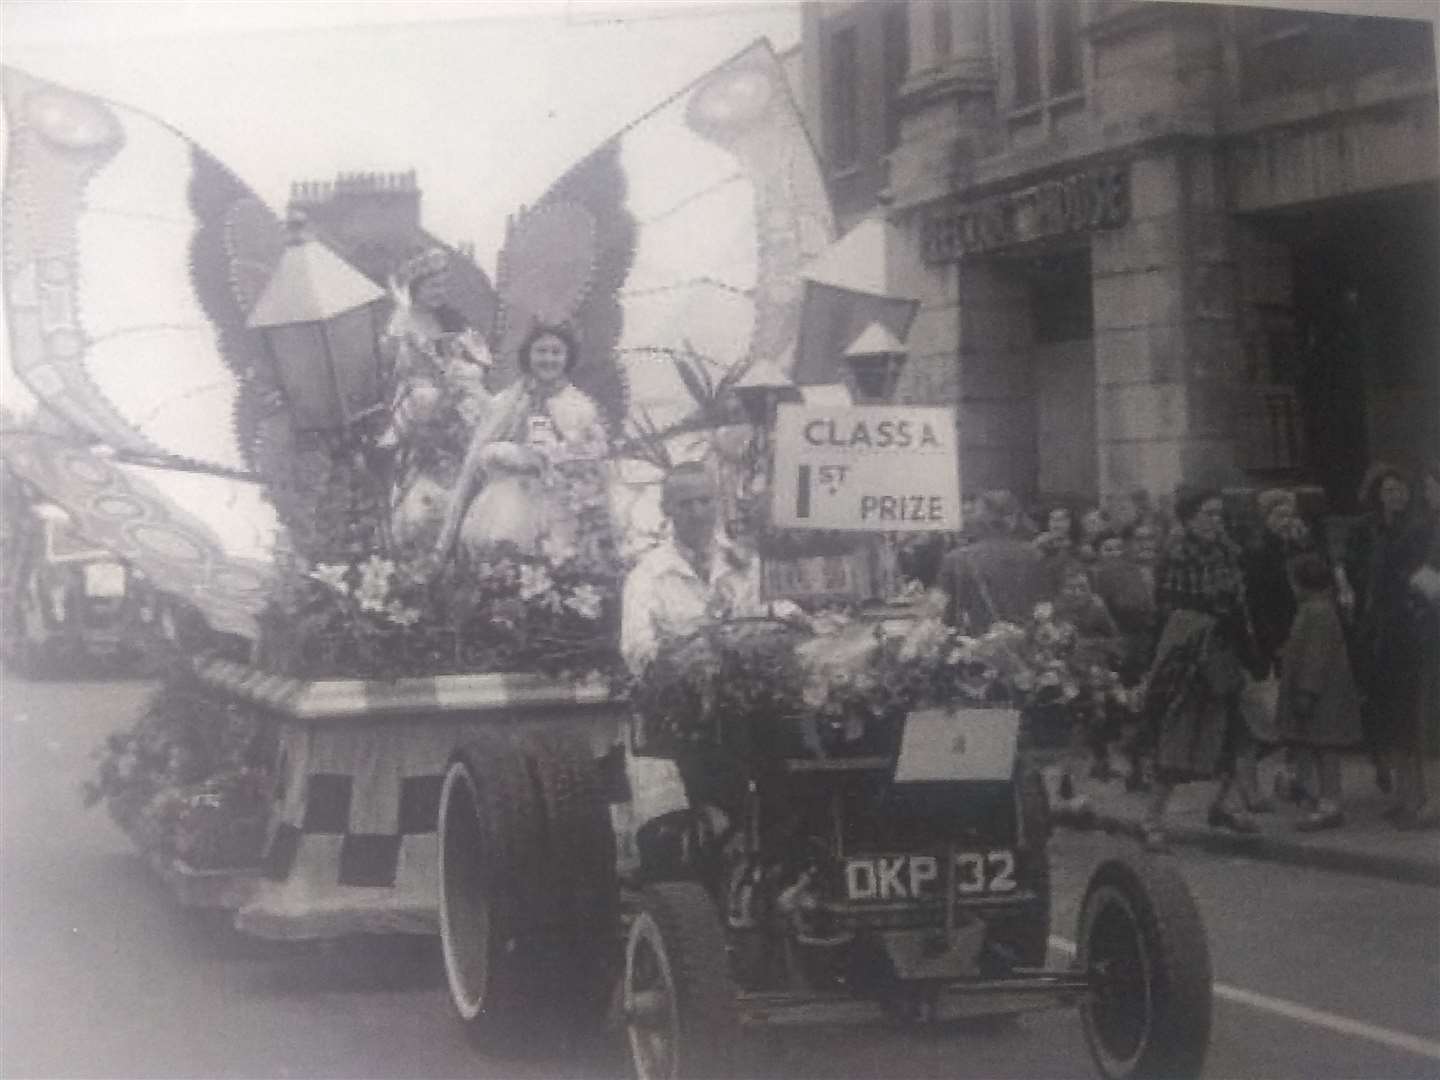 The Miss Herne Bay float in 1955